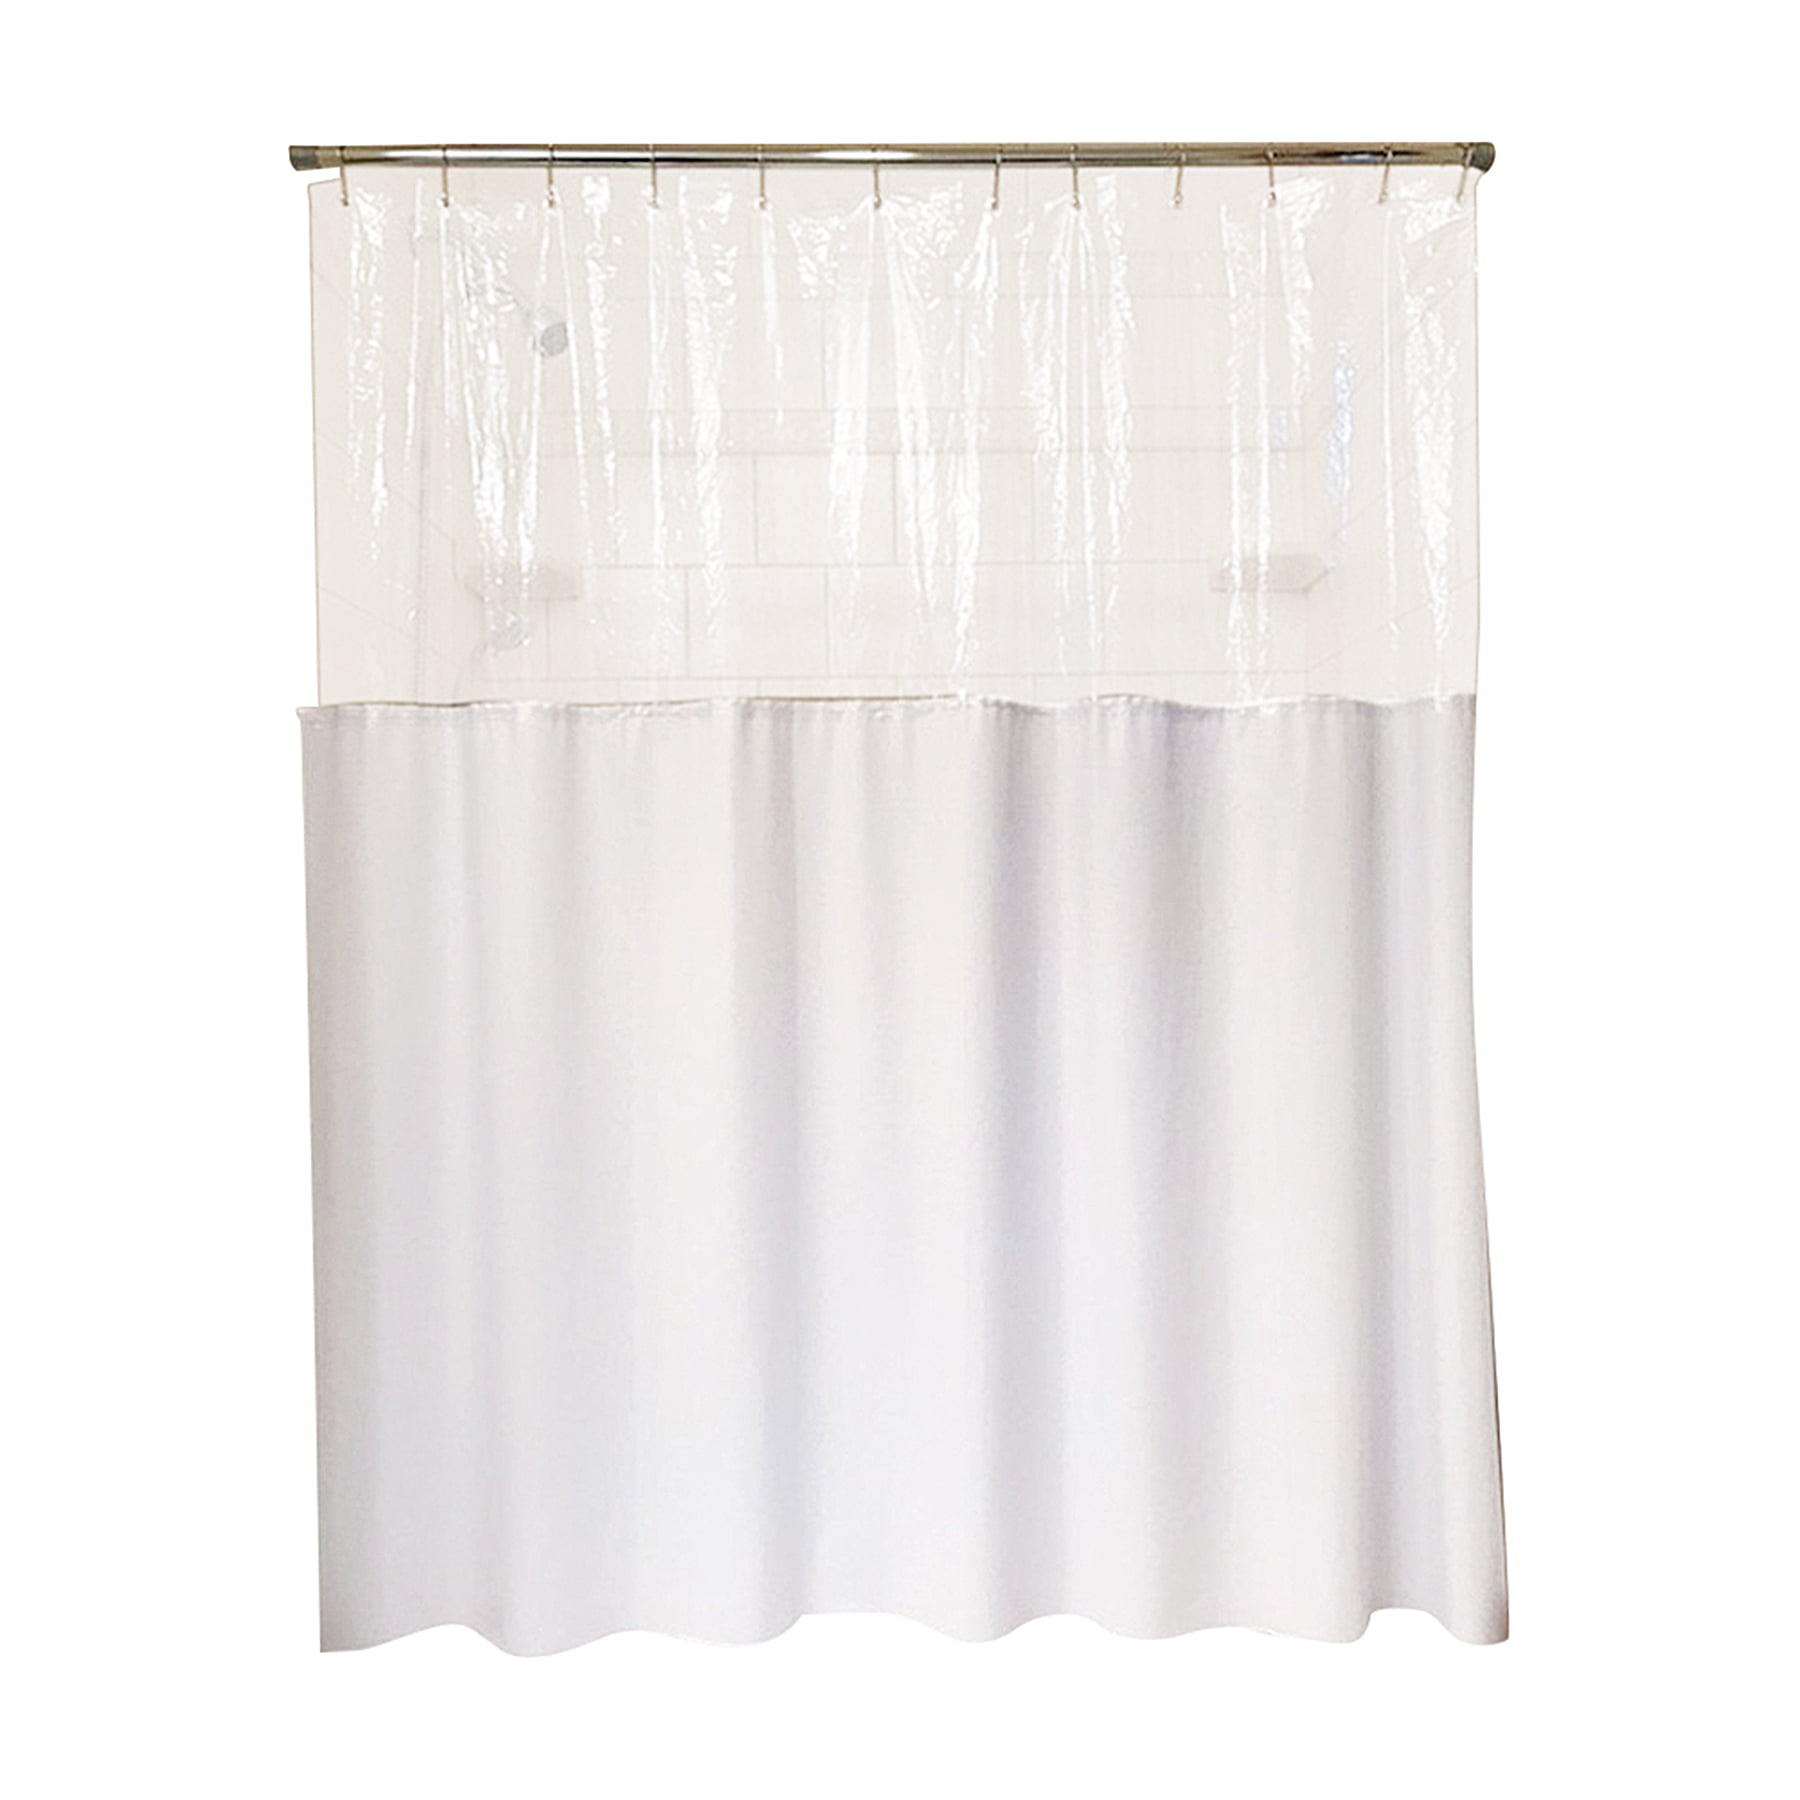 Clearview Privacy Shower Curtain, Shower Curtain That Lets Light Through